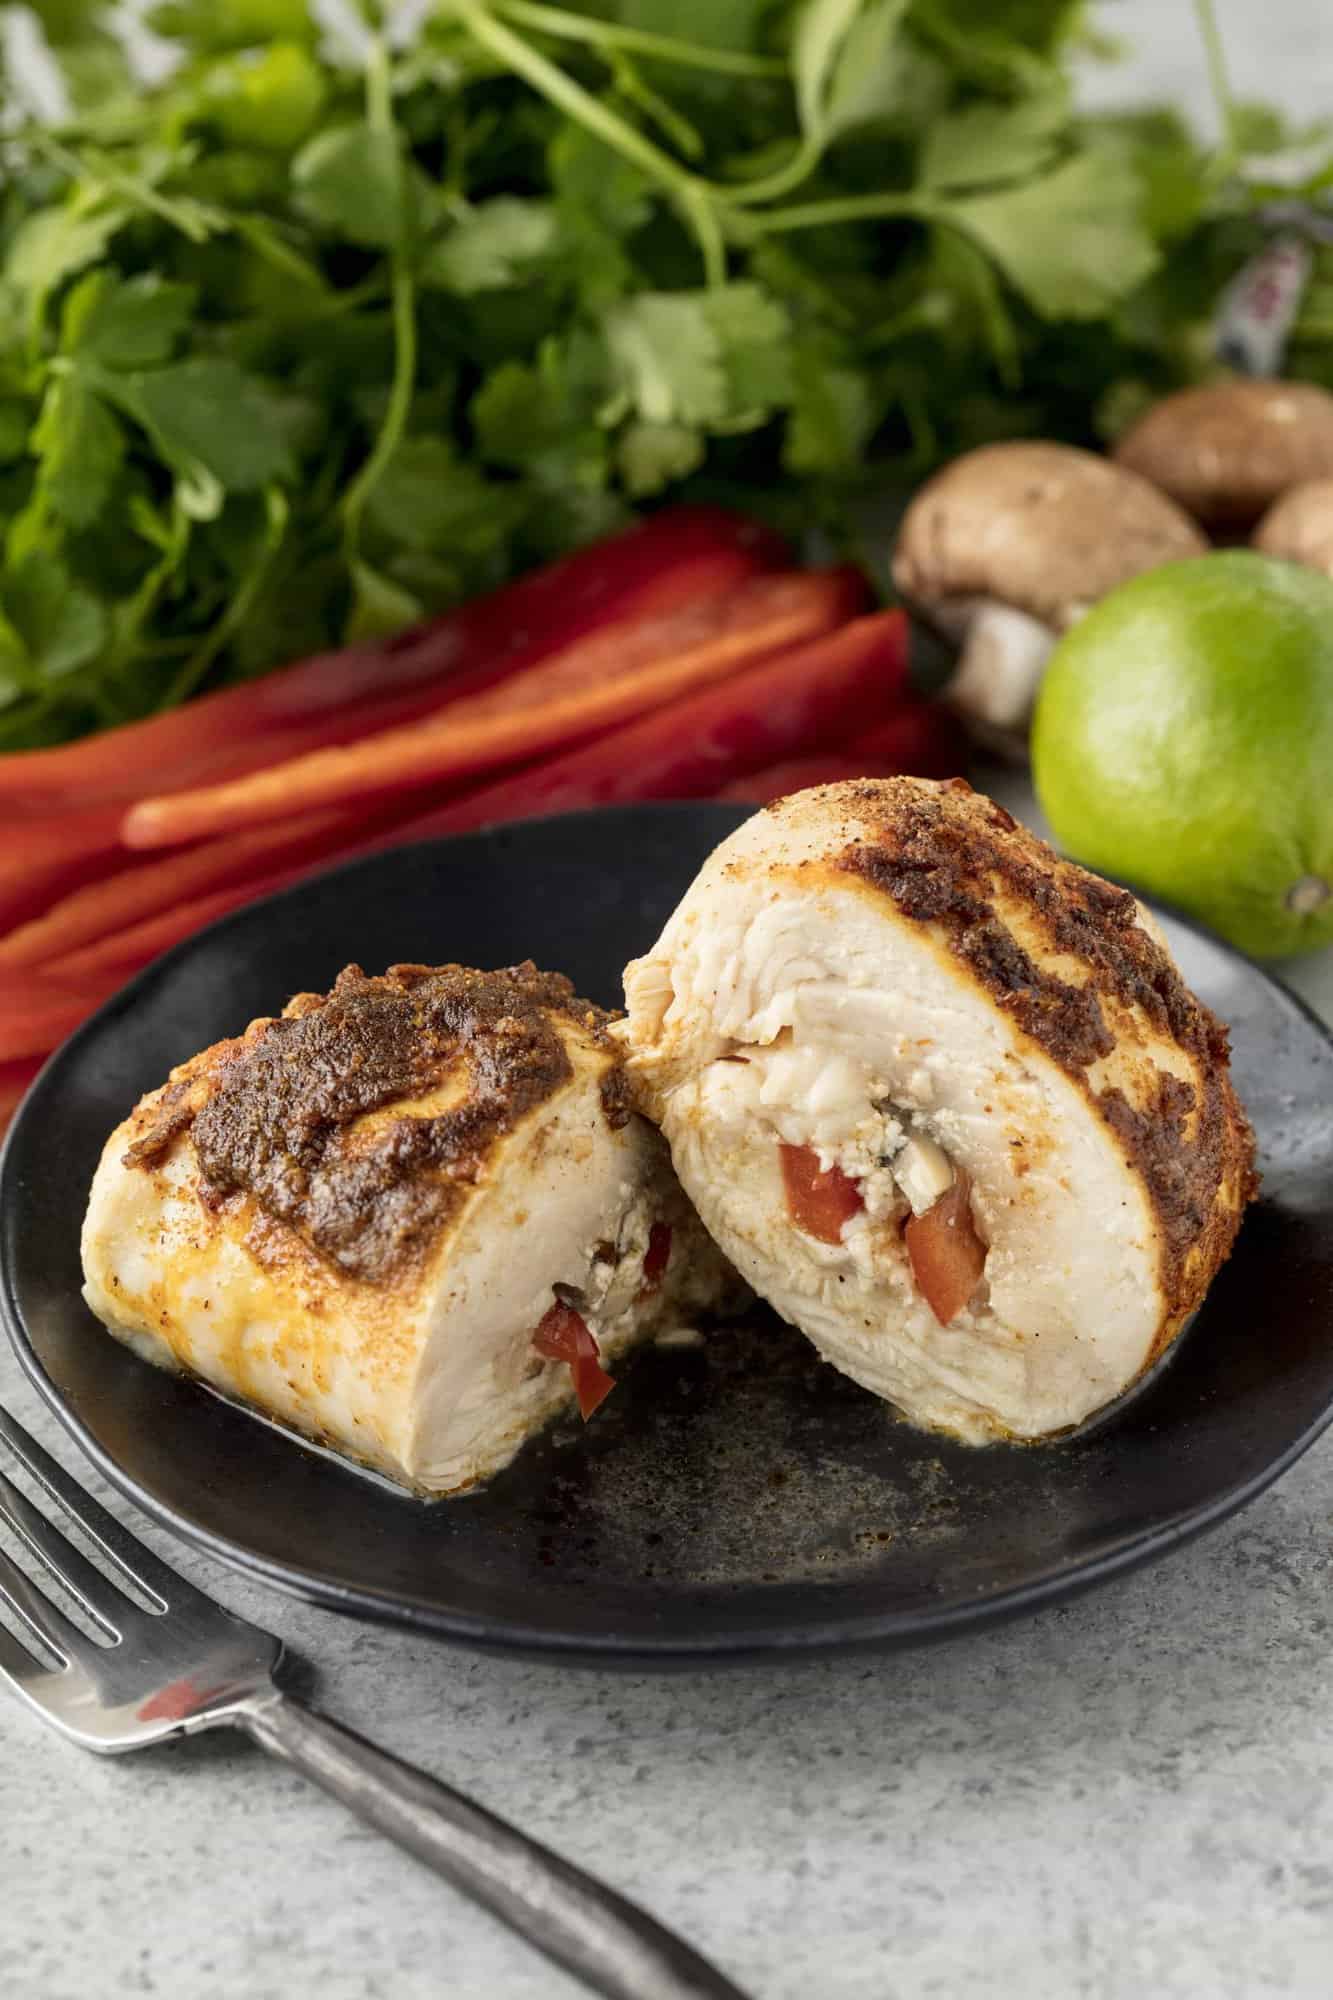 All the flavors you love from chicken fajitas in a fun and easy low carb format. Fajita Stuffed Chicken is a dish the whole family will love!